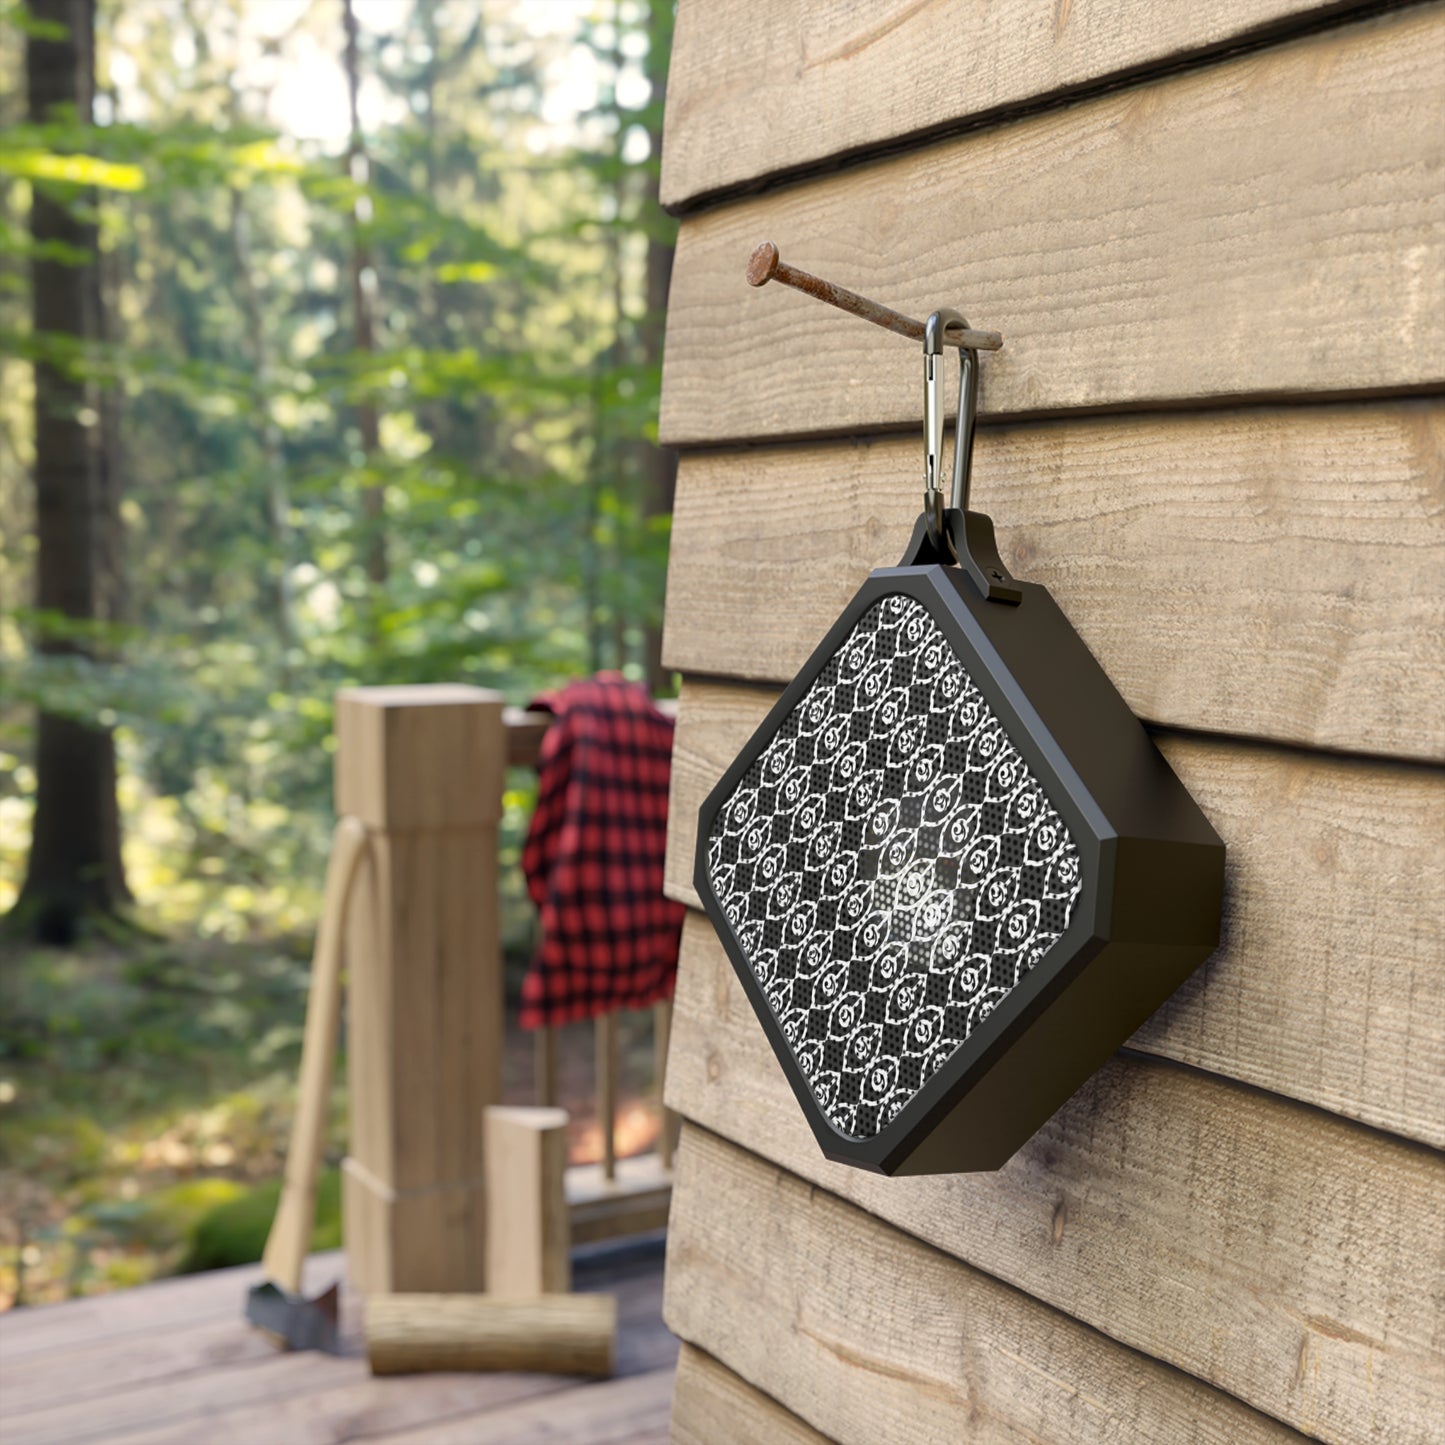 CyVision Blackwater Outdoor Bluetooth Speaker